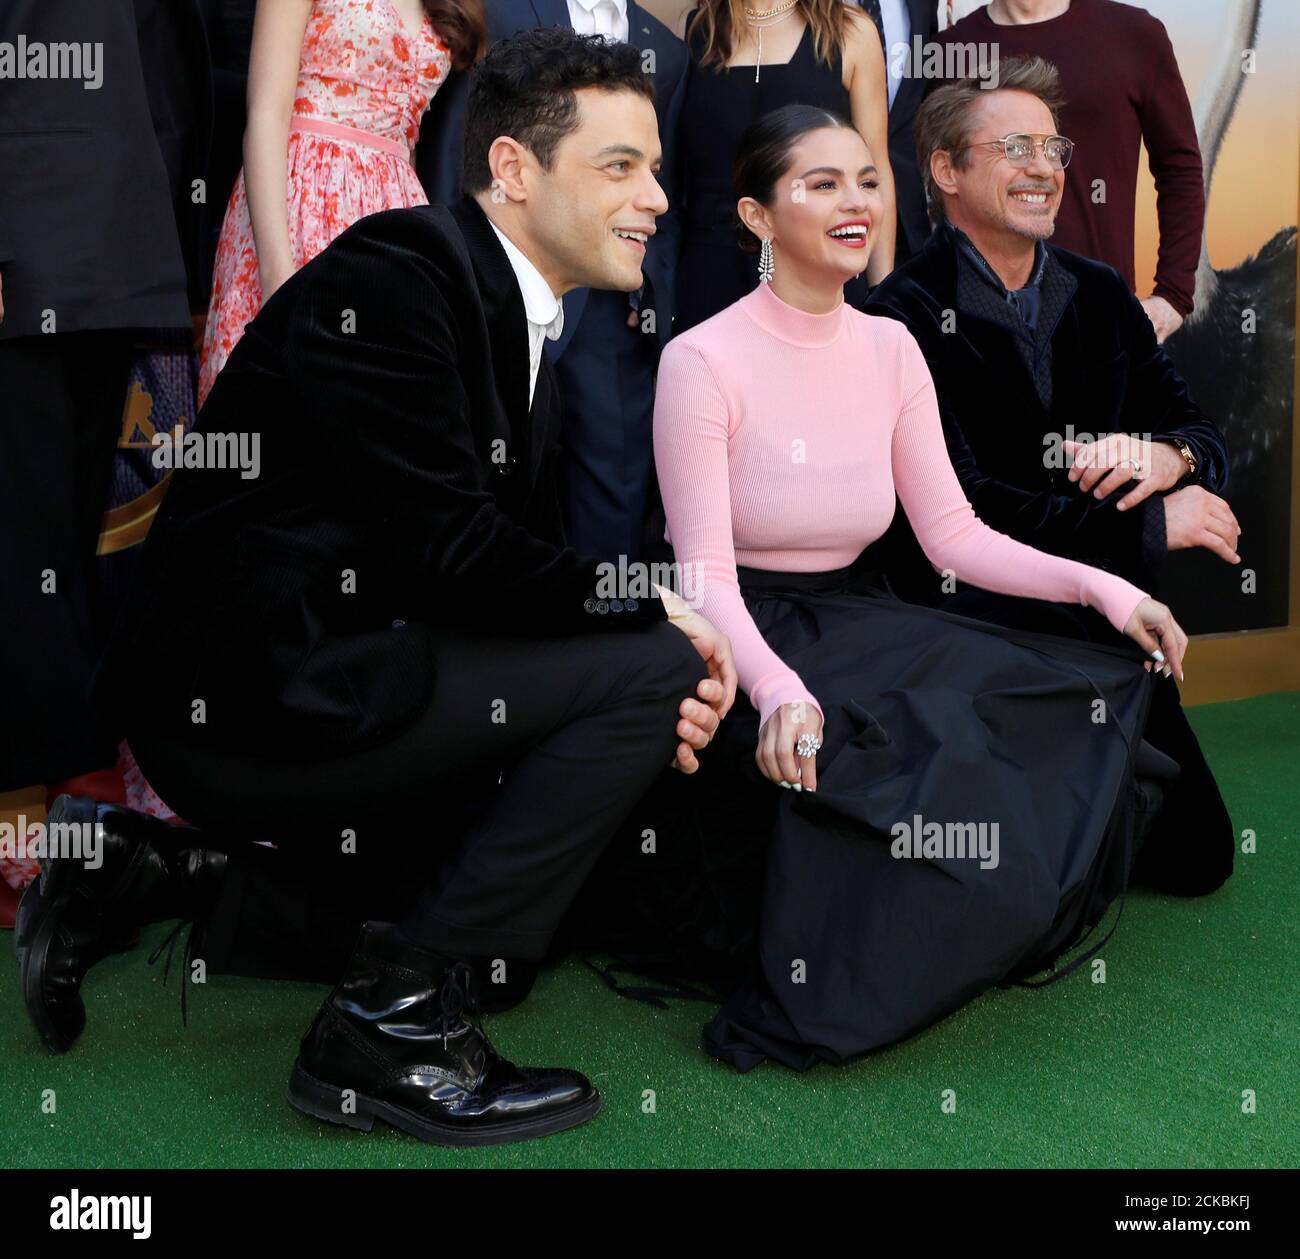 Cast members Rami Malek, Selena Gomez and Robert Downey Jr. pose at the  premiere for the film "Dolittle" in Los Angeles, California, U.S., January  11, 2020. REUTERS/Mario Anzuoni Stock Photo - Alamy